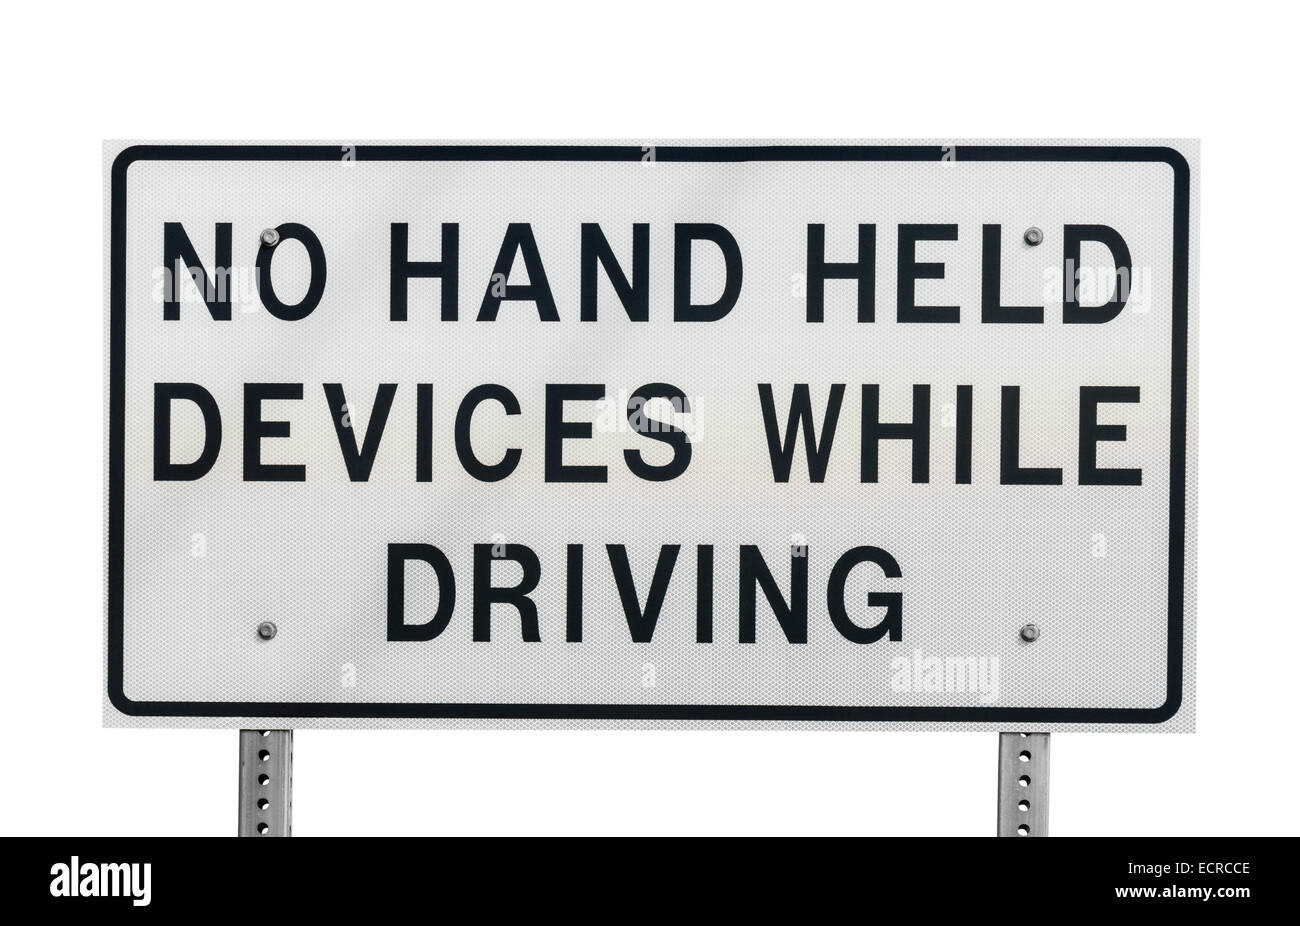 No hand held devices while driving sign isolated with clipping path. Stock Photo